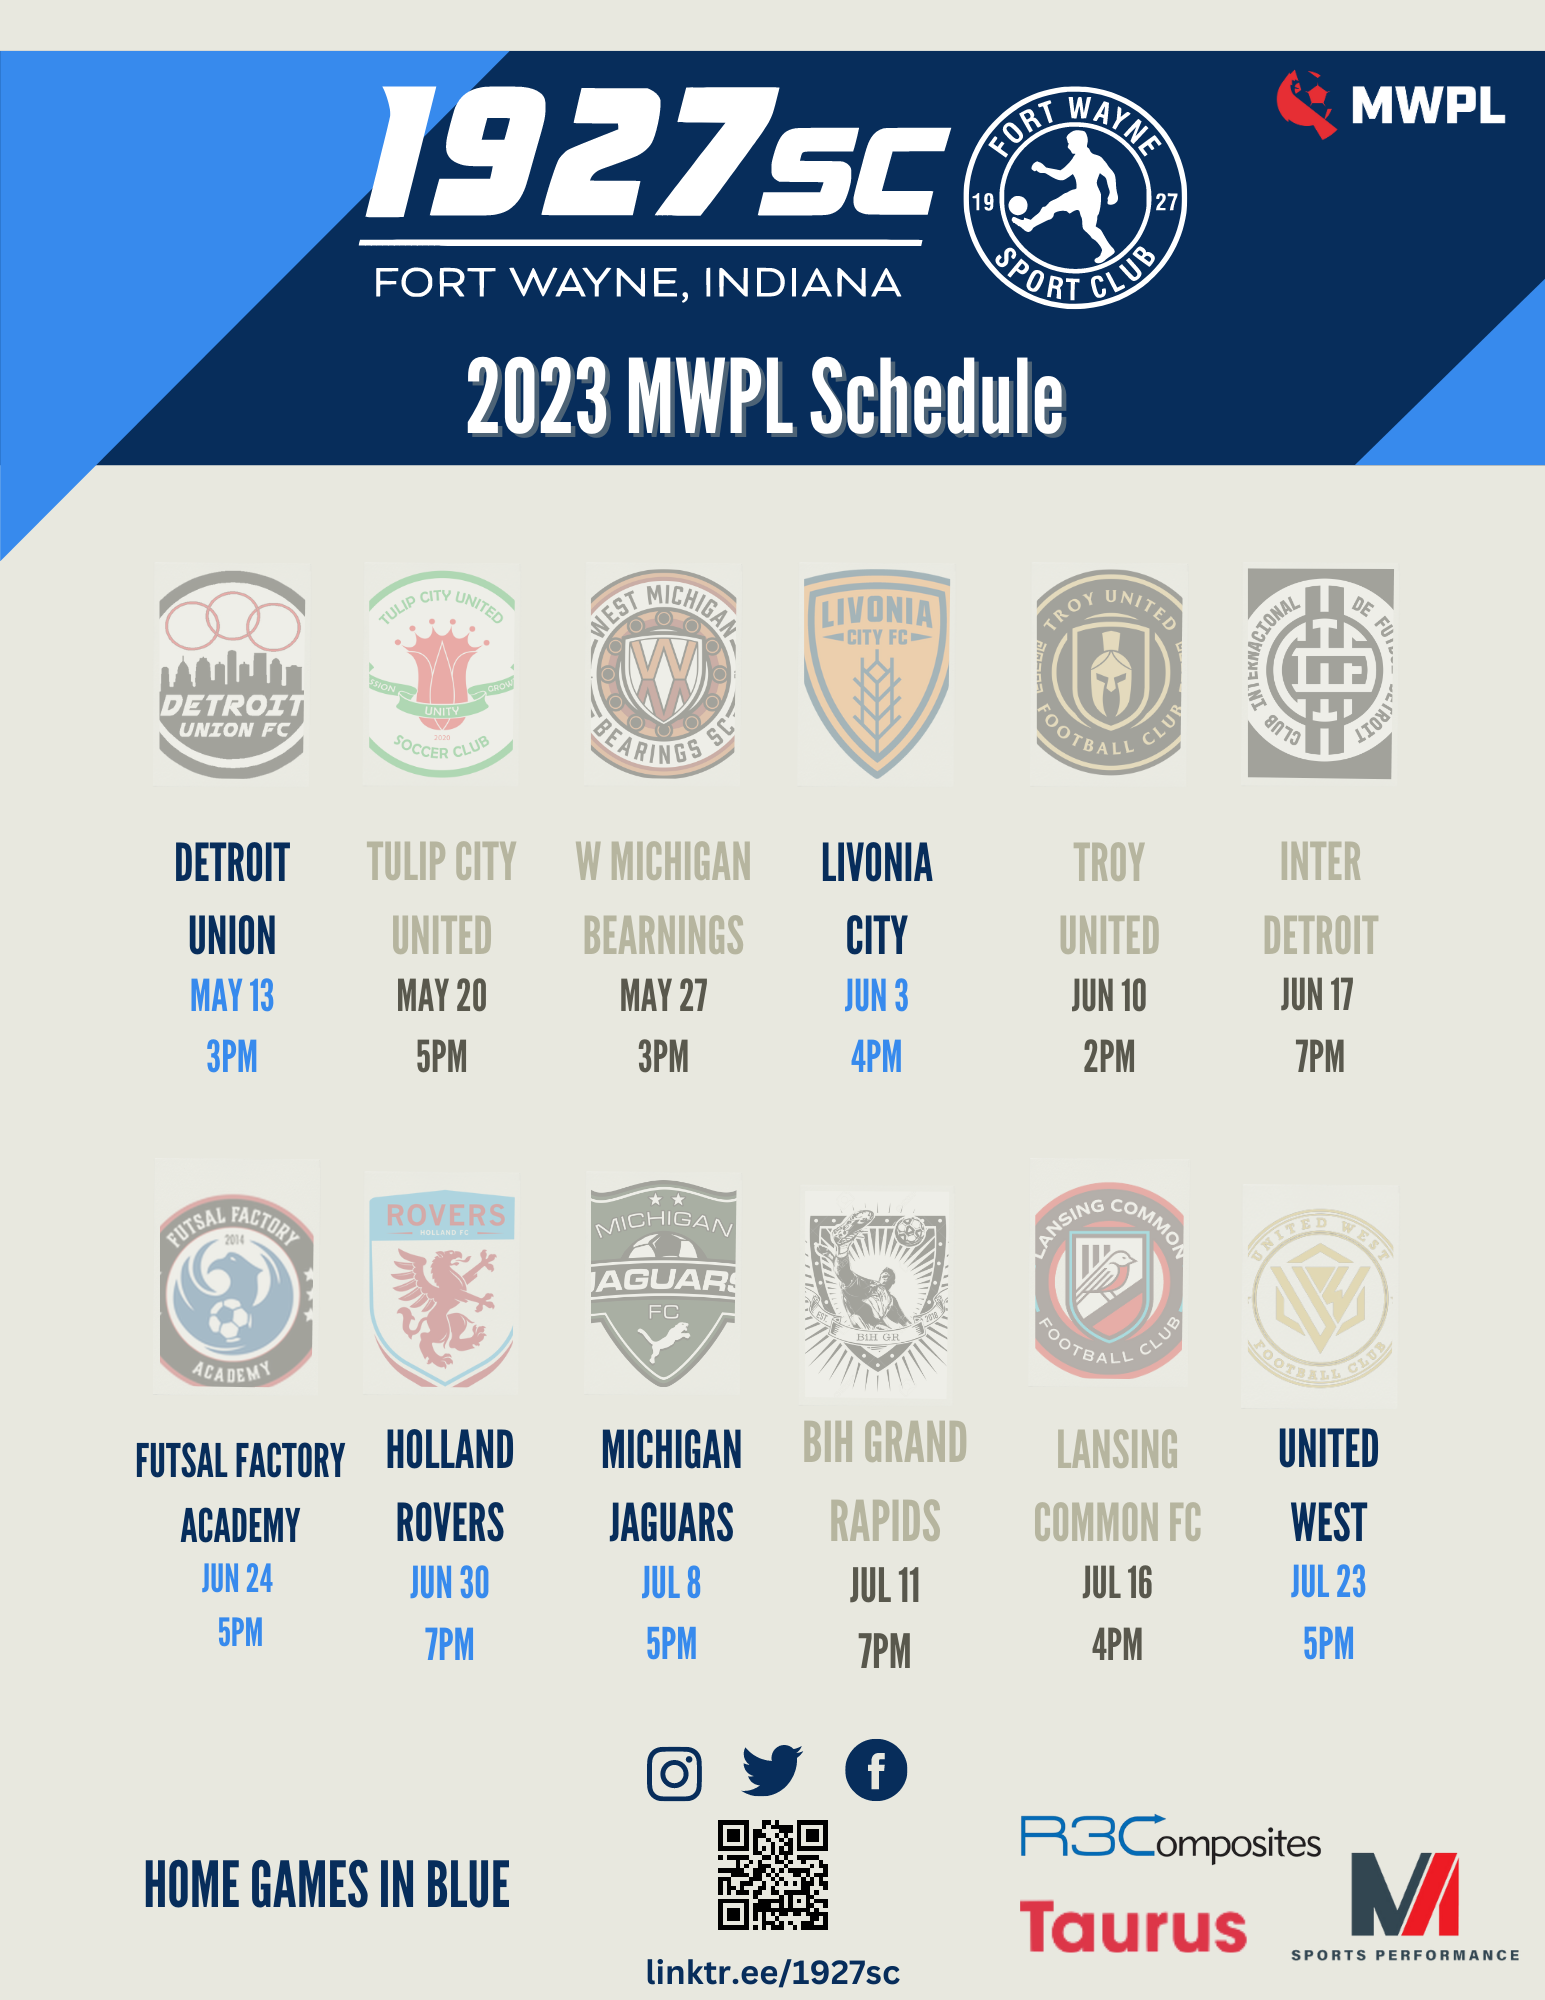 The 2023 schedule for 1927SC.